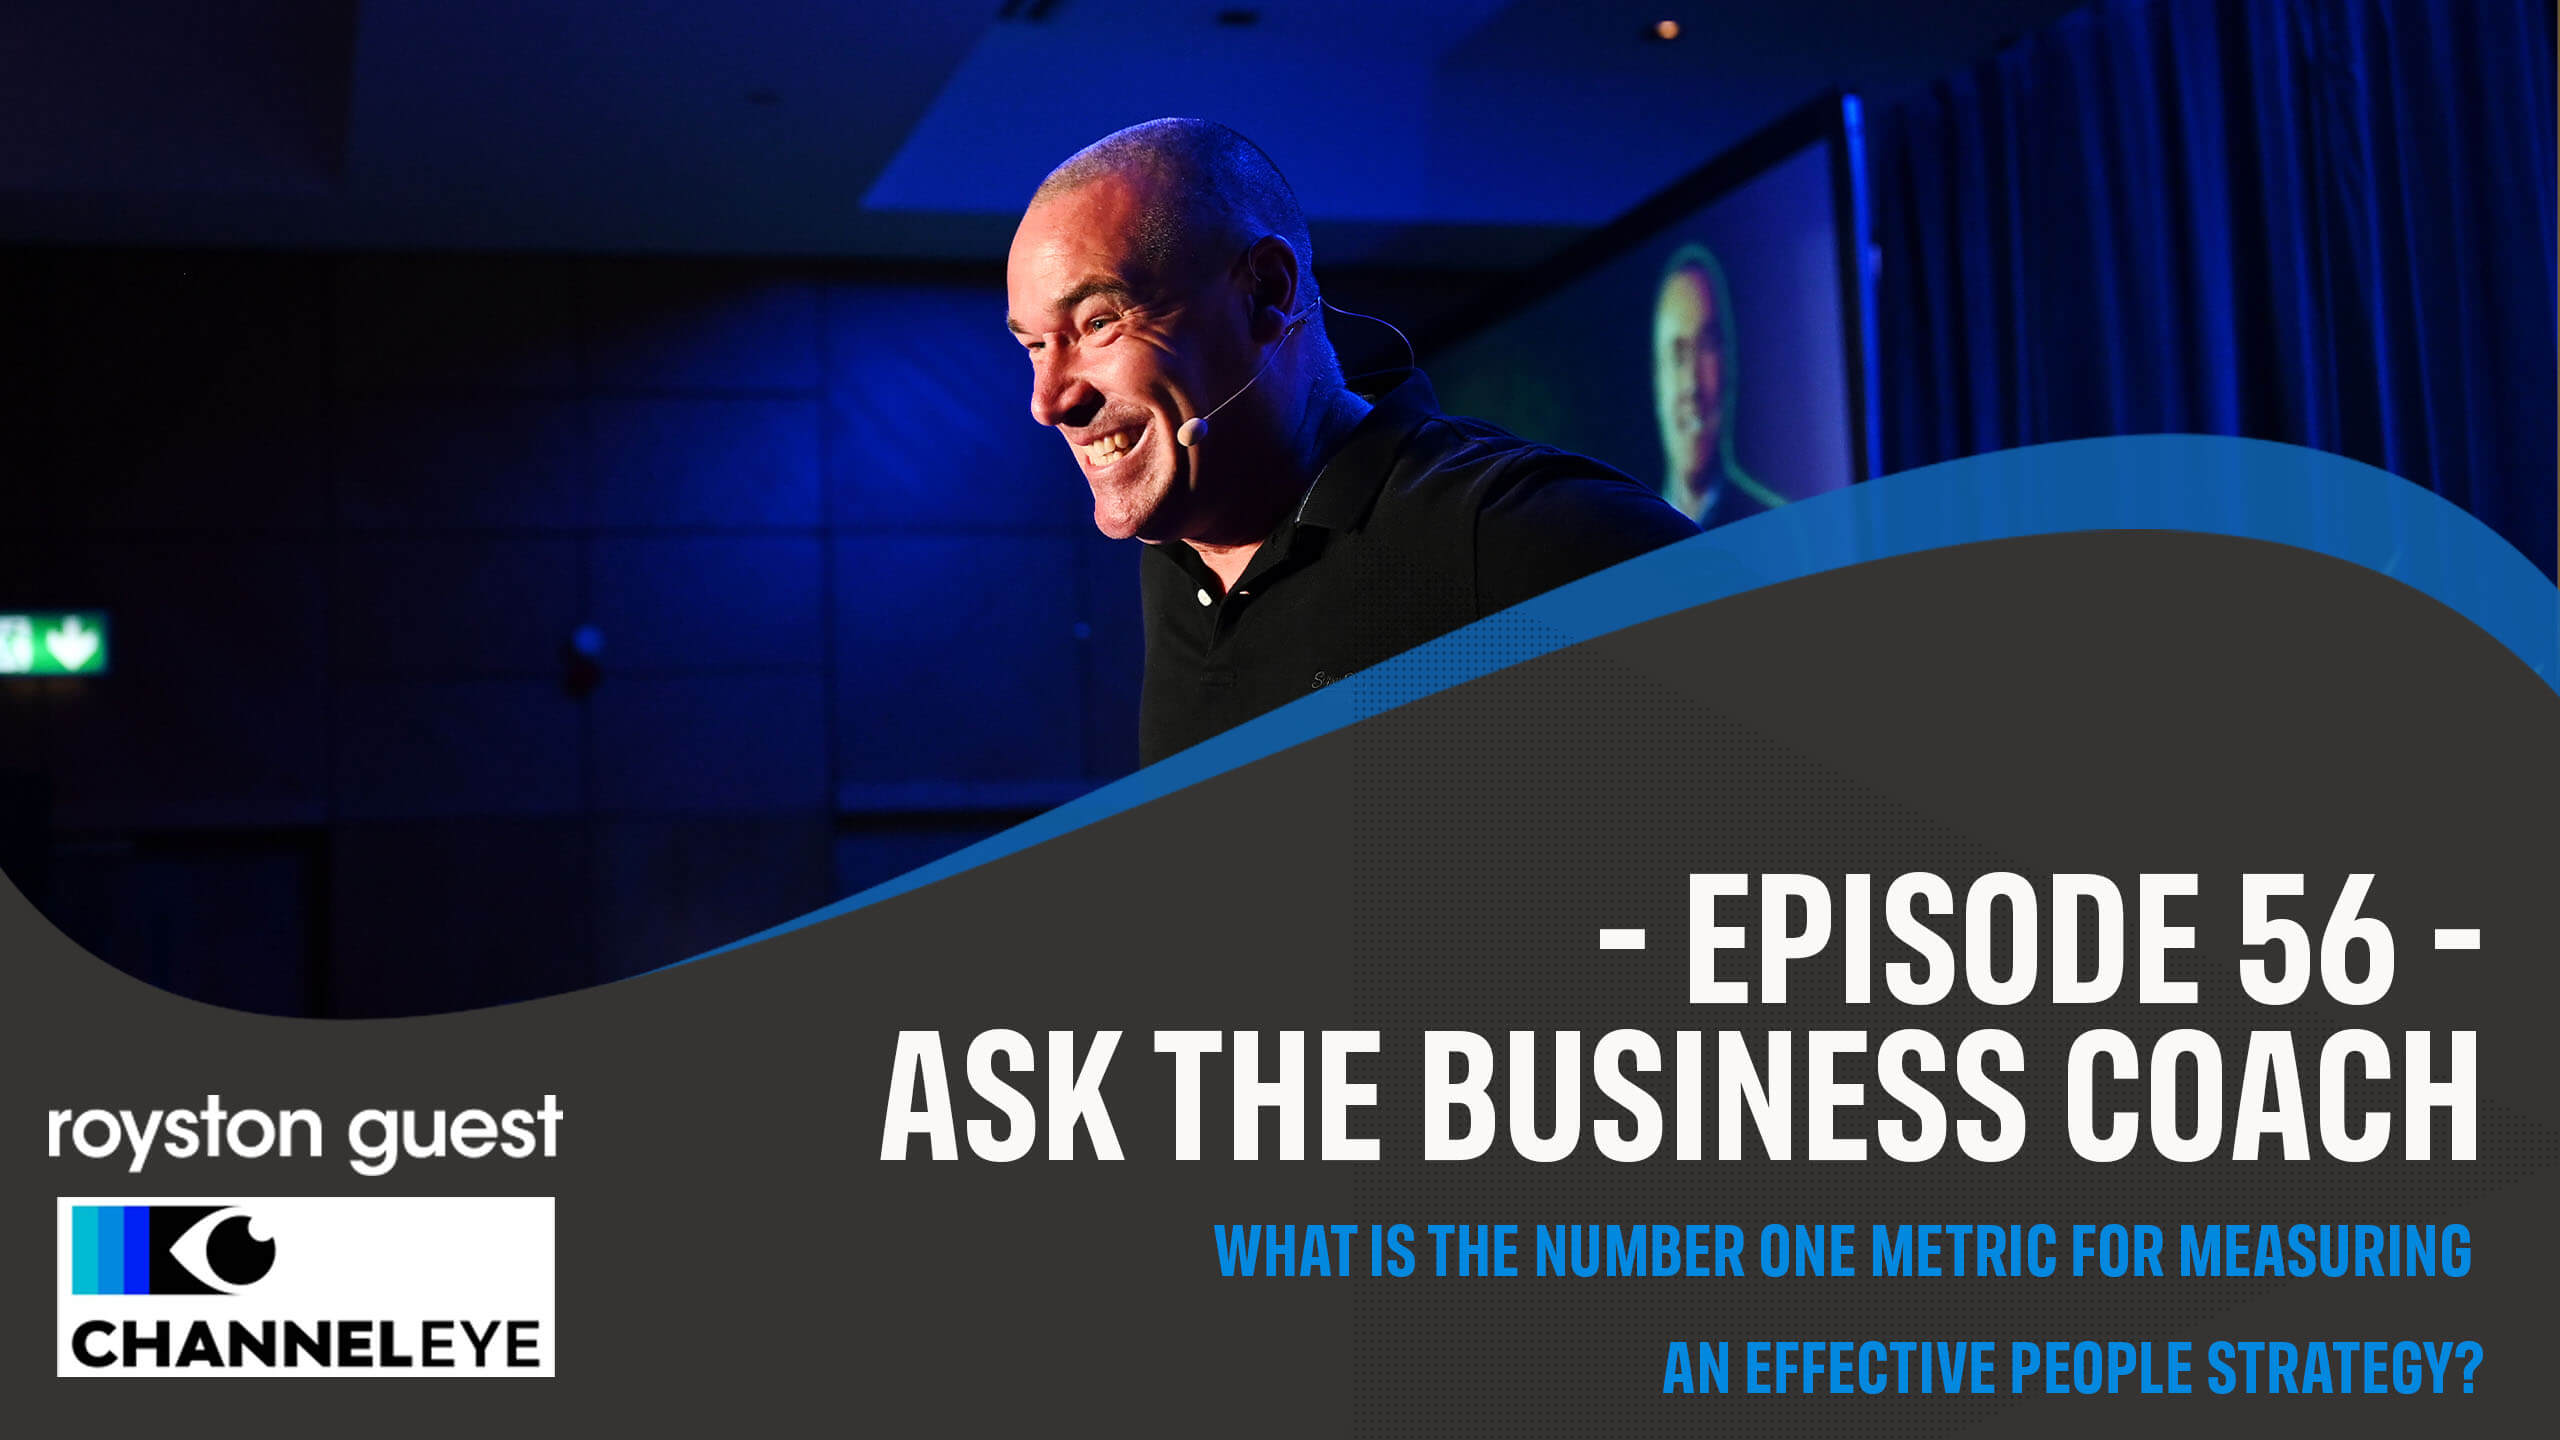 Ask The business Coach Episode 56 - Royston Guest